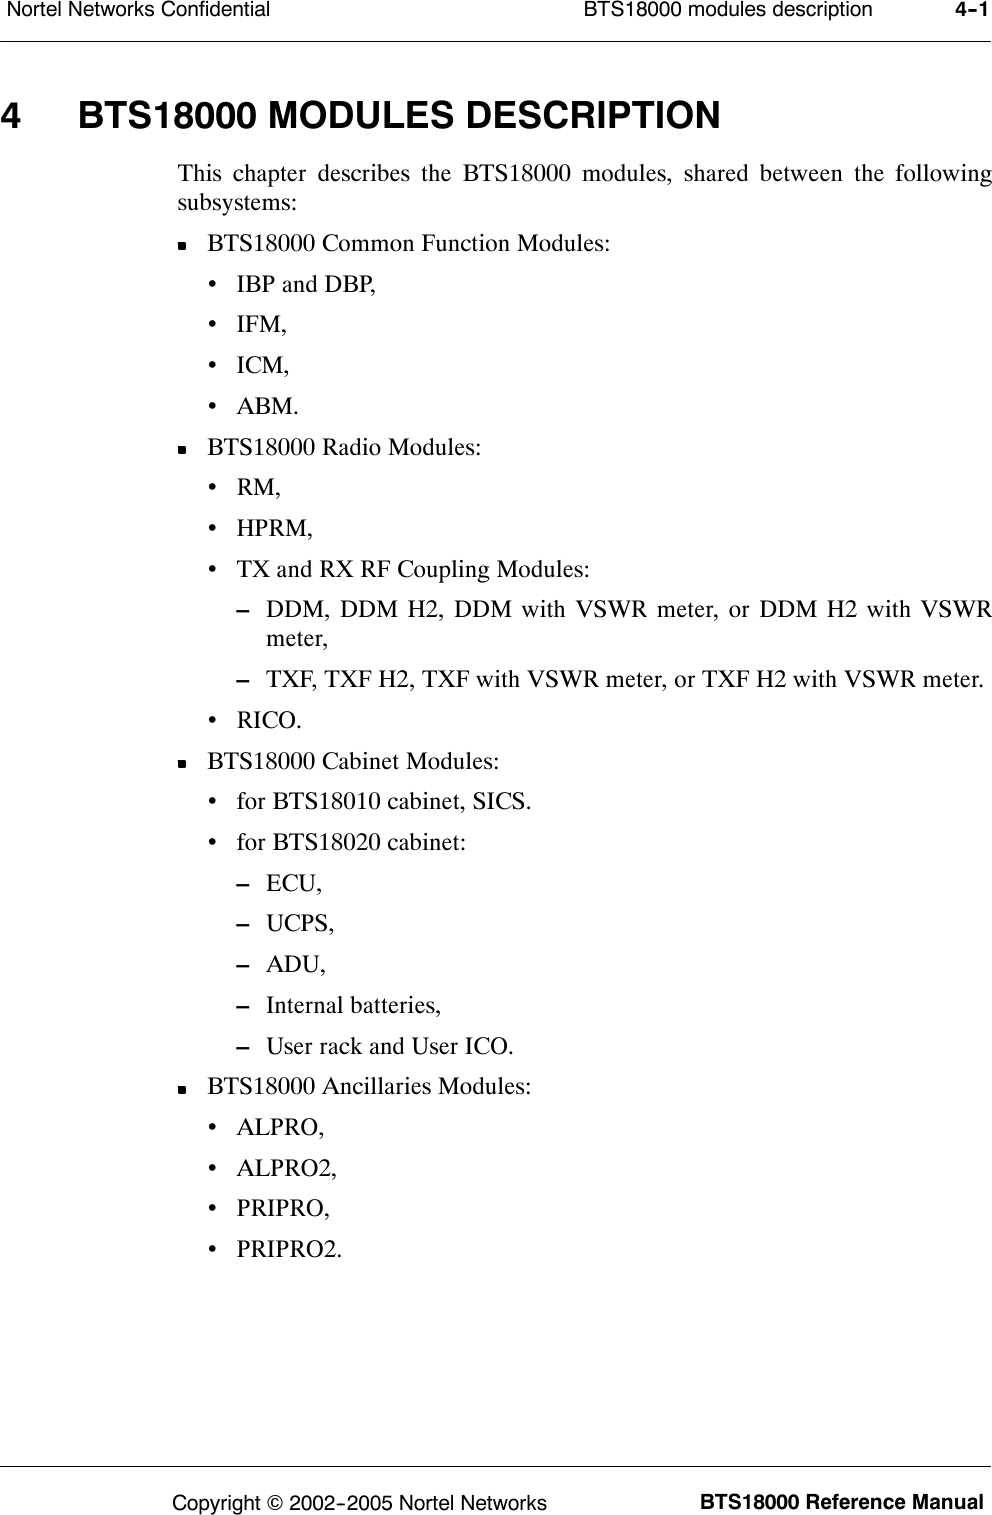 BTS18000 modules descriptionNortel Networks Confidential 4--1BTS18000 Reference ManualCopyright ©2002--2005 Nortel Networks4 BTS18000 MODULES DESCRIPTIONThis chapter describes the BTS18000 modules, shared between the followingsubsystems:BTS18000 Common Function Modules:•IBP and DBP,•IFM,•ICM,•ABM.BTS18000 Radio Modules:•RM,•HPRM,•TX and RX RF Coupling Modules:–DDM, DDM H2, DDM with VSWR meter, or DDM H2 with VSWRmeter,–TXF, TXF H2, TXF with VSWR meter, or TXF H2 with VSWR meter.•RICO.BTS18000 Cabinet Modules:•for BTS18010 cabinet, SICS.•for BTS18020 cabinet:–ECU,–UCPS,–ADU,–Internal batteries,–User rack and User ICO.BTS18000 Ancillaries Modules:•ALPRO,•ALPRO2,•PRIPRO,•PRIPRO2.